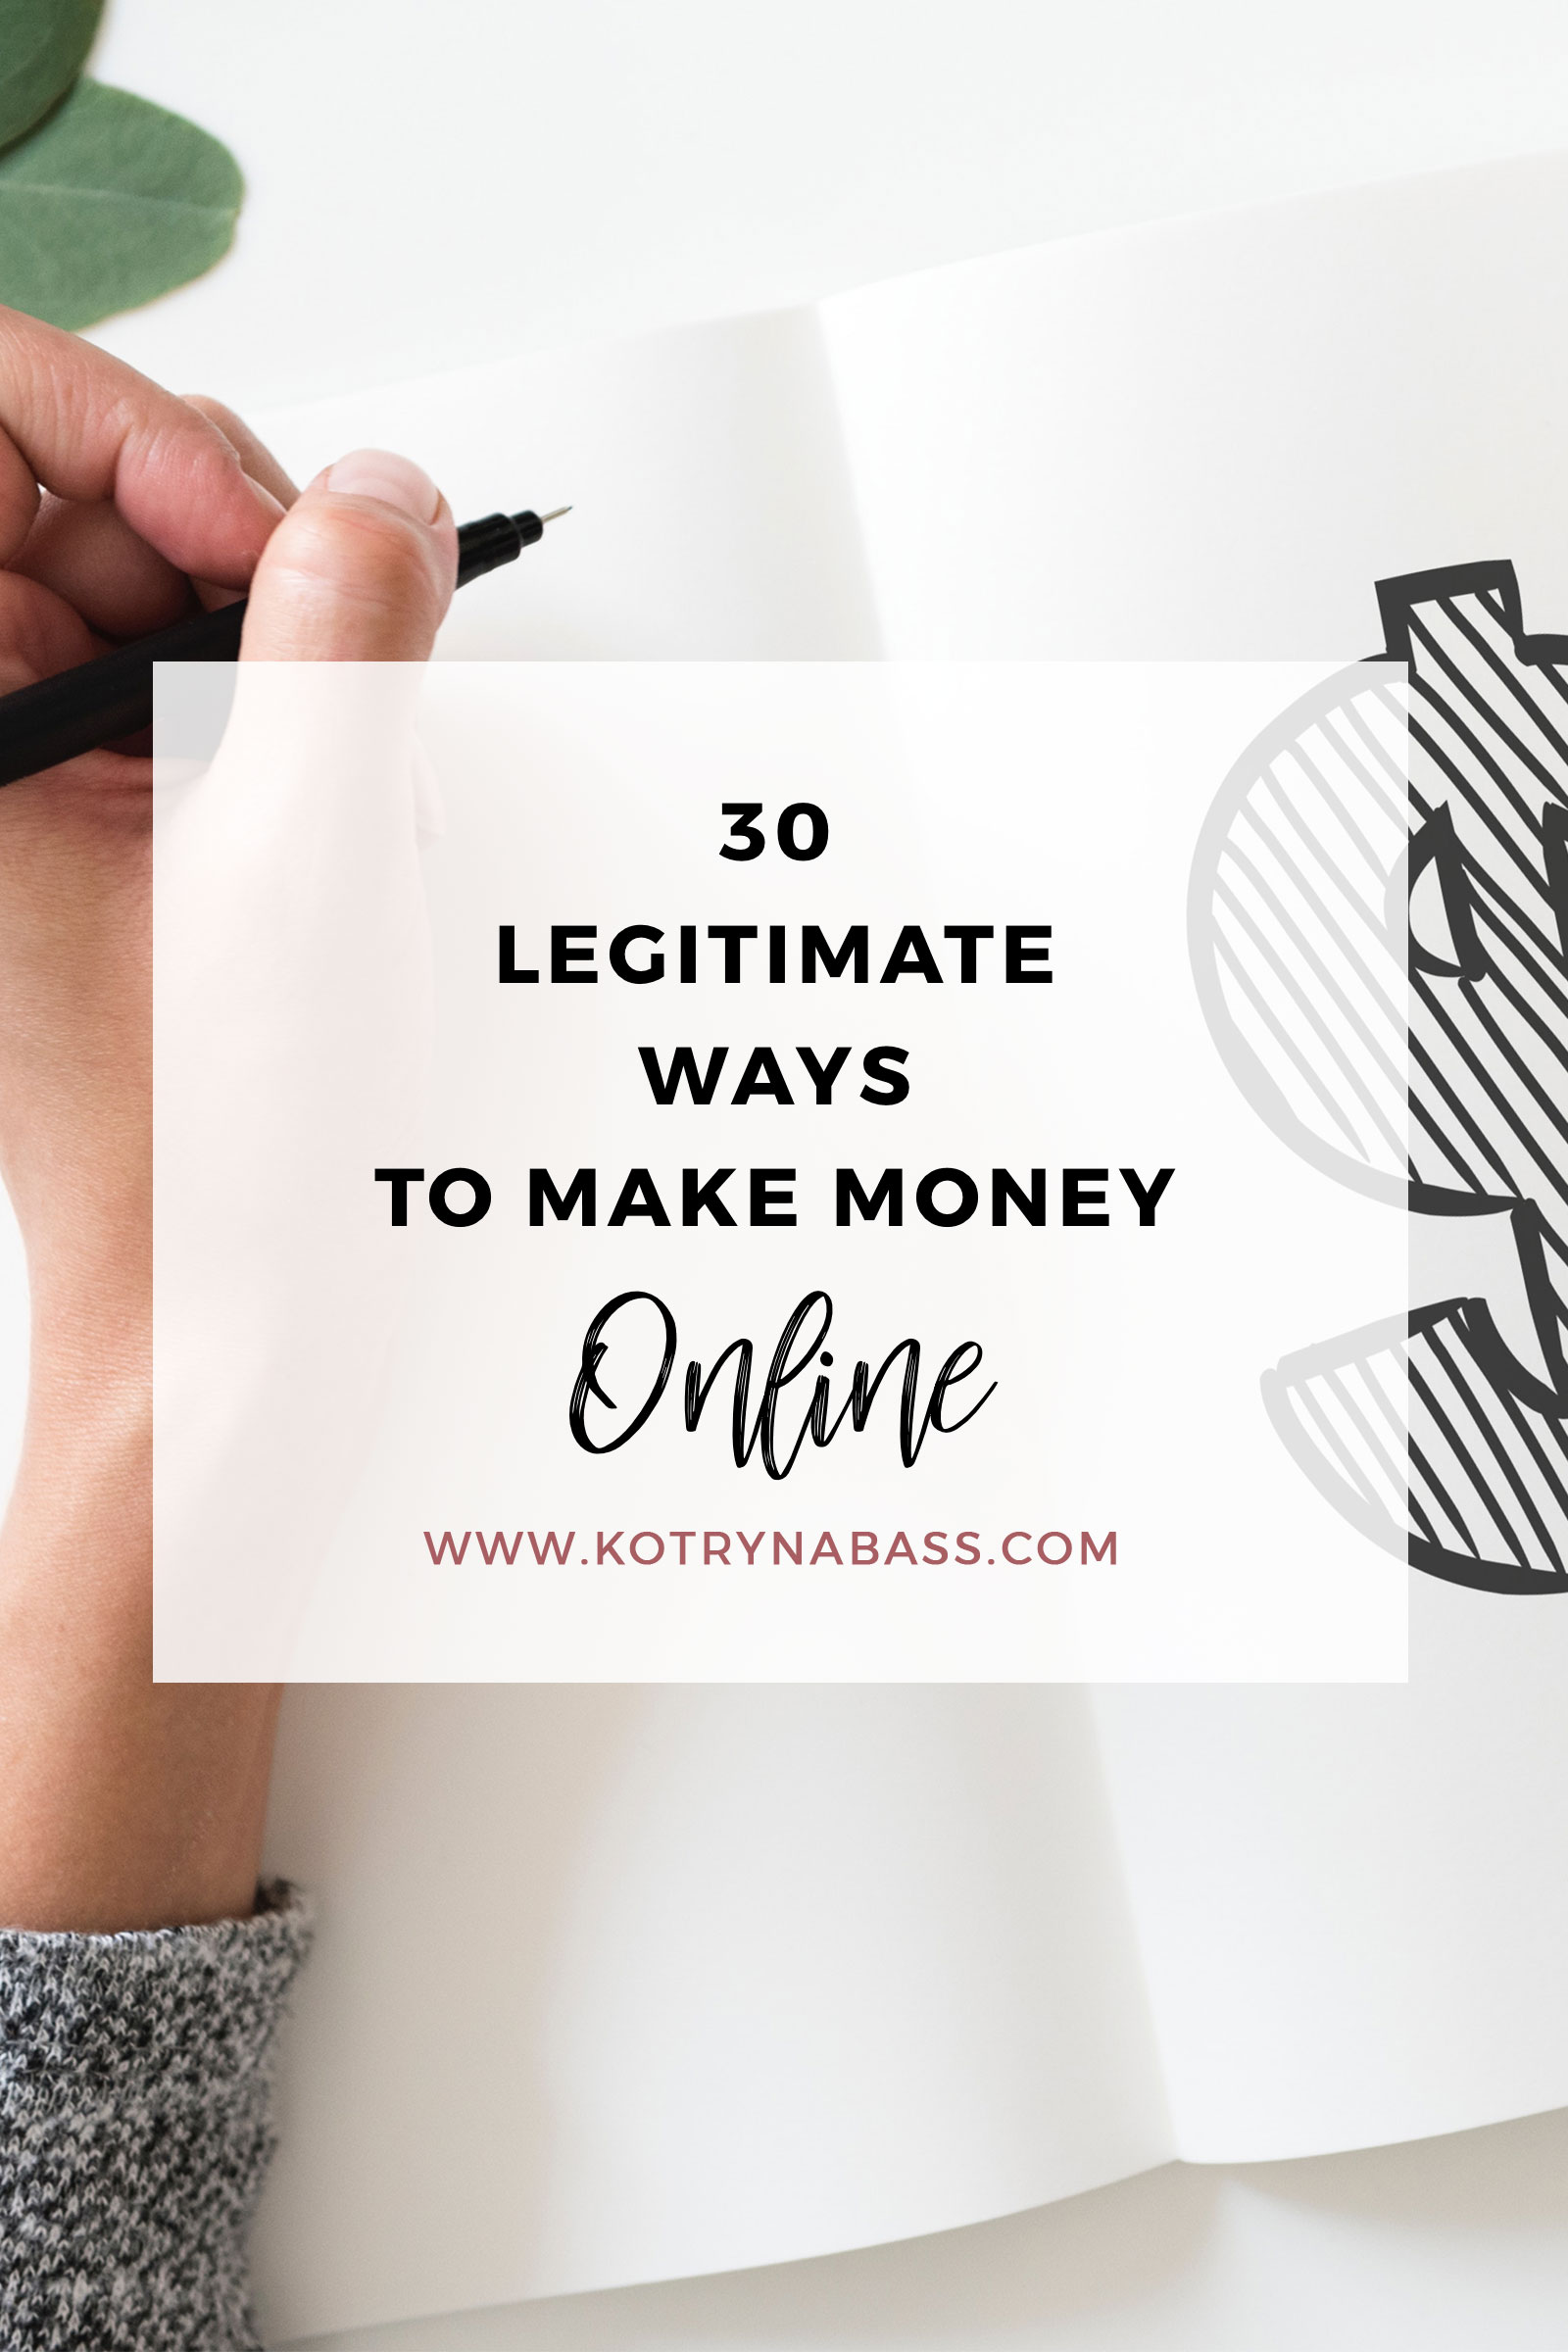 You wish to give making money online a try, but have no idea where to start? I have at least 30 ideas for you in this post, are you ready?